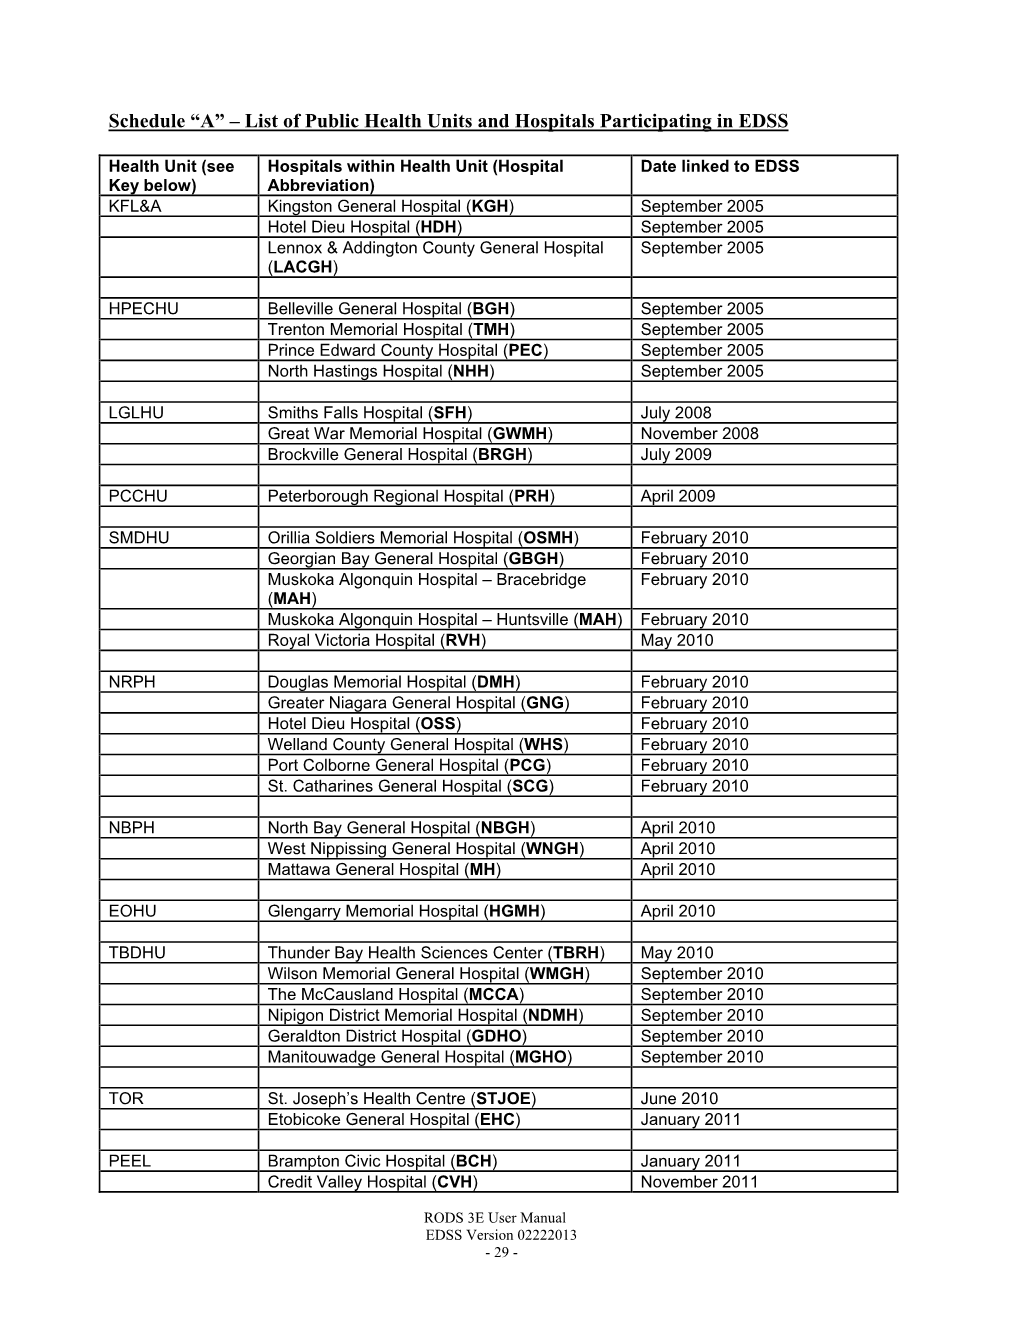 List of Public Health Units and Hospitals Participating in EDSS